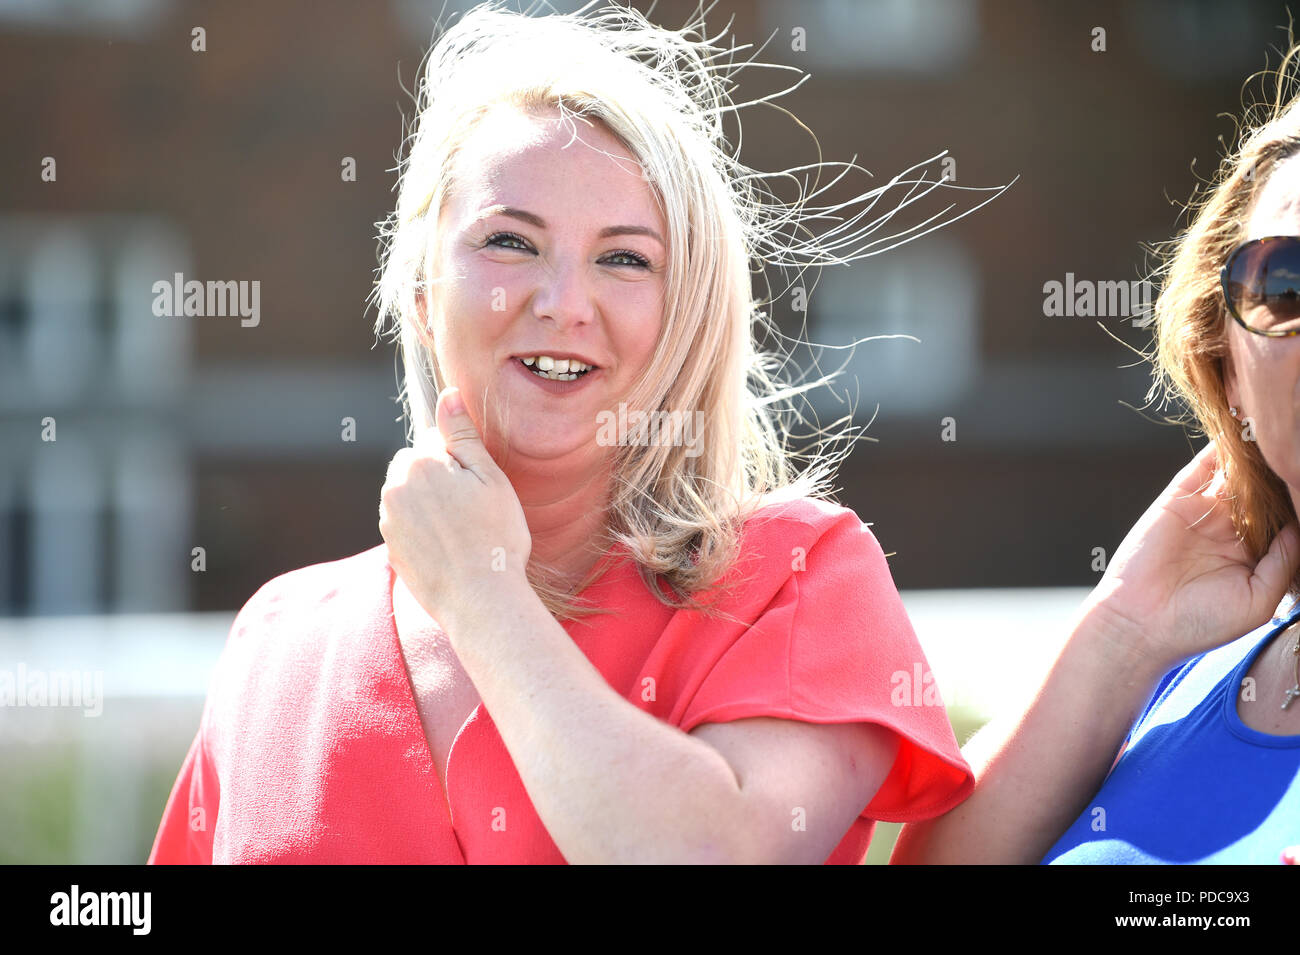 Brighton UK 8th August 2018 -  Th windy but bright weather played havoc with the hair at the Brighton Races Marathonbet Festival of Racing Marstons Opening Day  Credit: Simon Dack/Alamy Live News Stock Photo